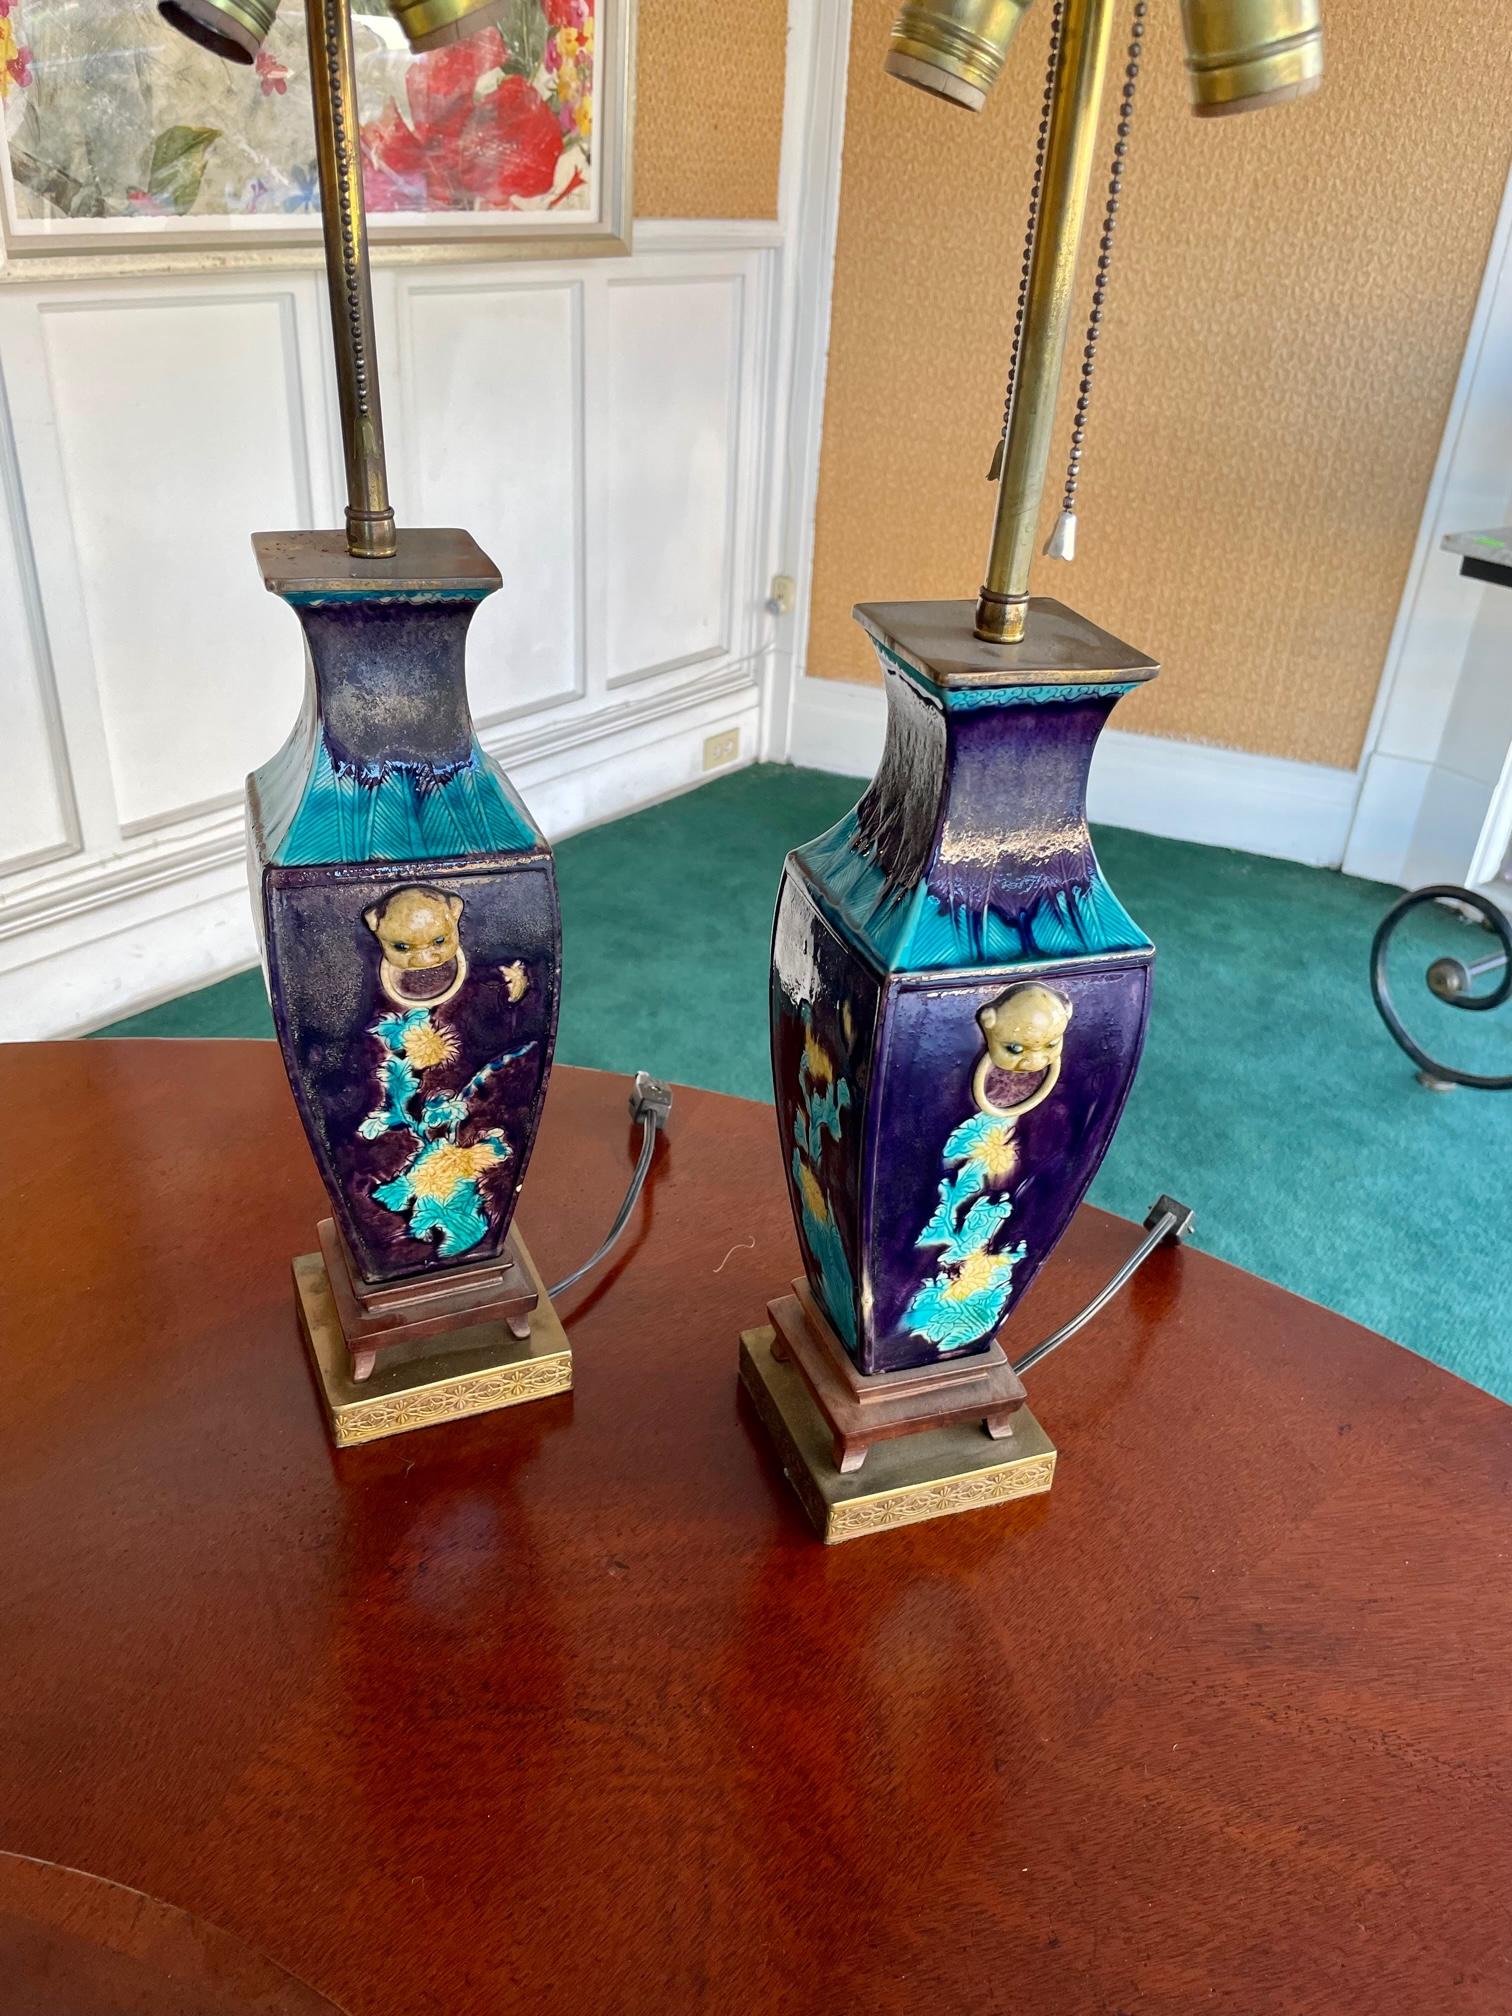 Pair of Fahua-style glazed porcelain vases, late 19th century; mounted and electrified as lamps, on simple teak stands and mounted on incised brass plinth bases; including custom yellow silk box pleat shades. Fahua refers to Chinese style ware